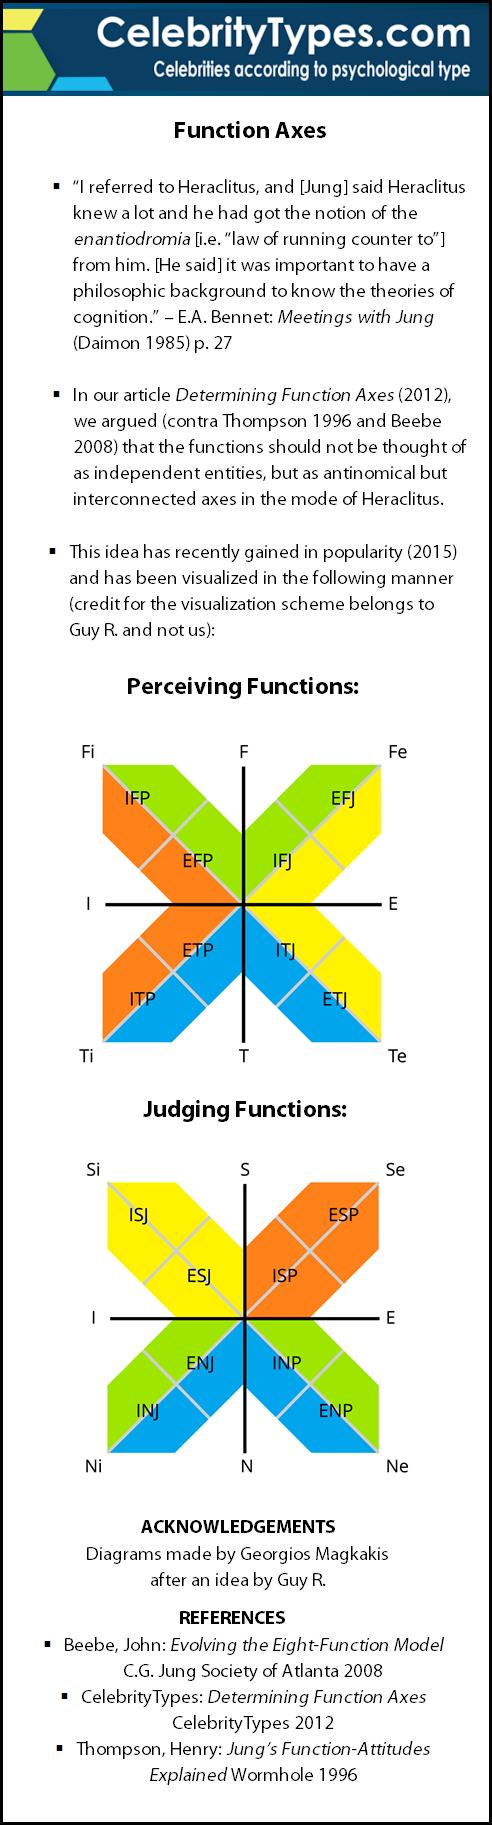 The 8 functions. Энантиодромия. Fi vs Fe MBTI. Jungian functions. Cognitive functions Test.